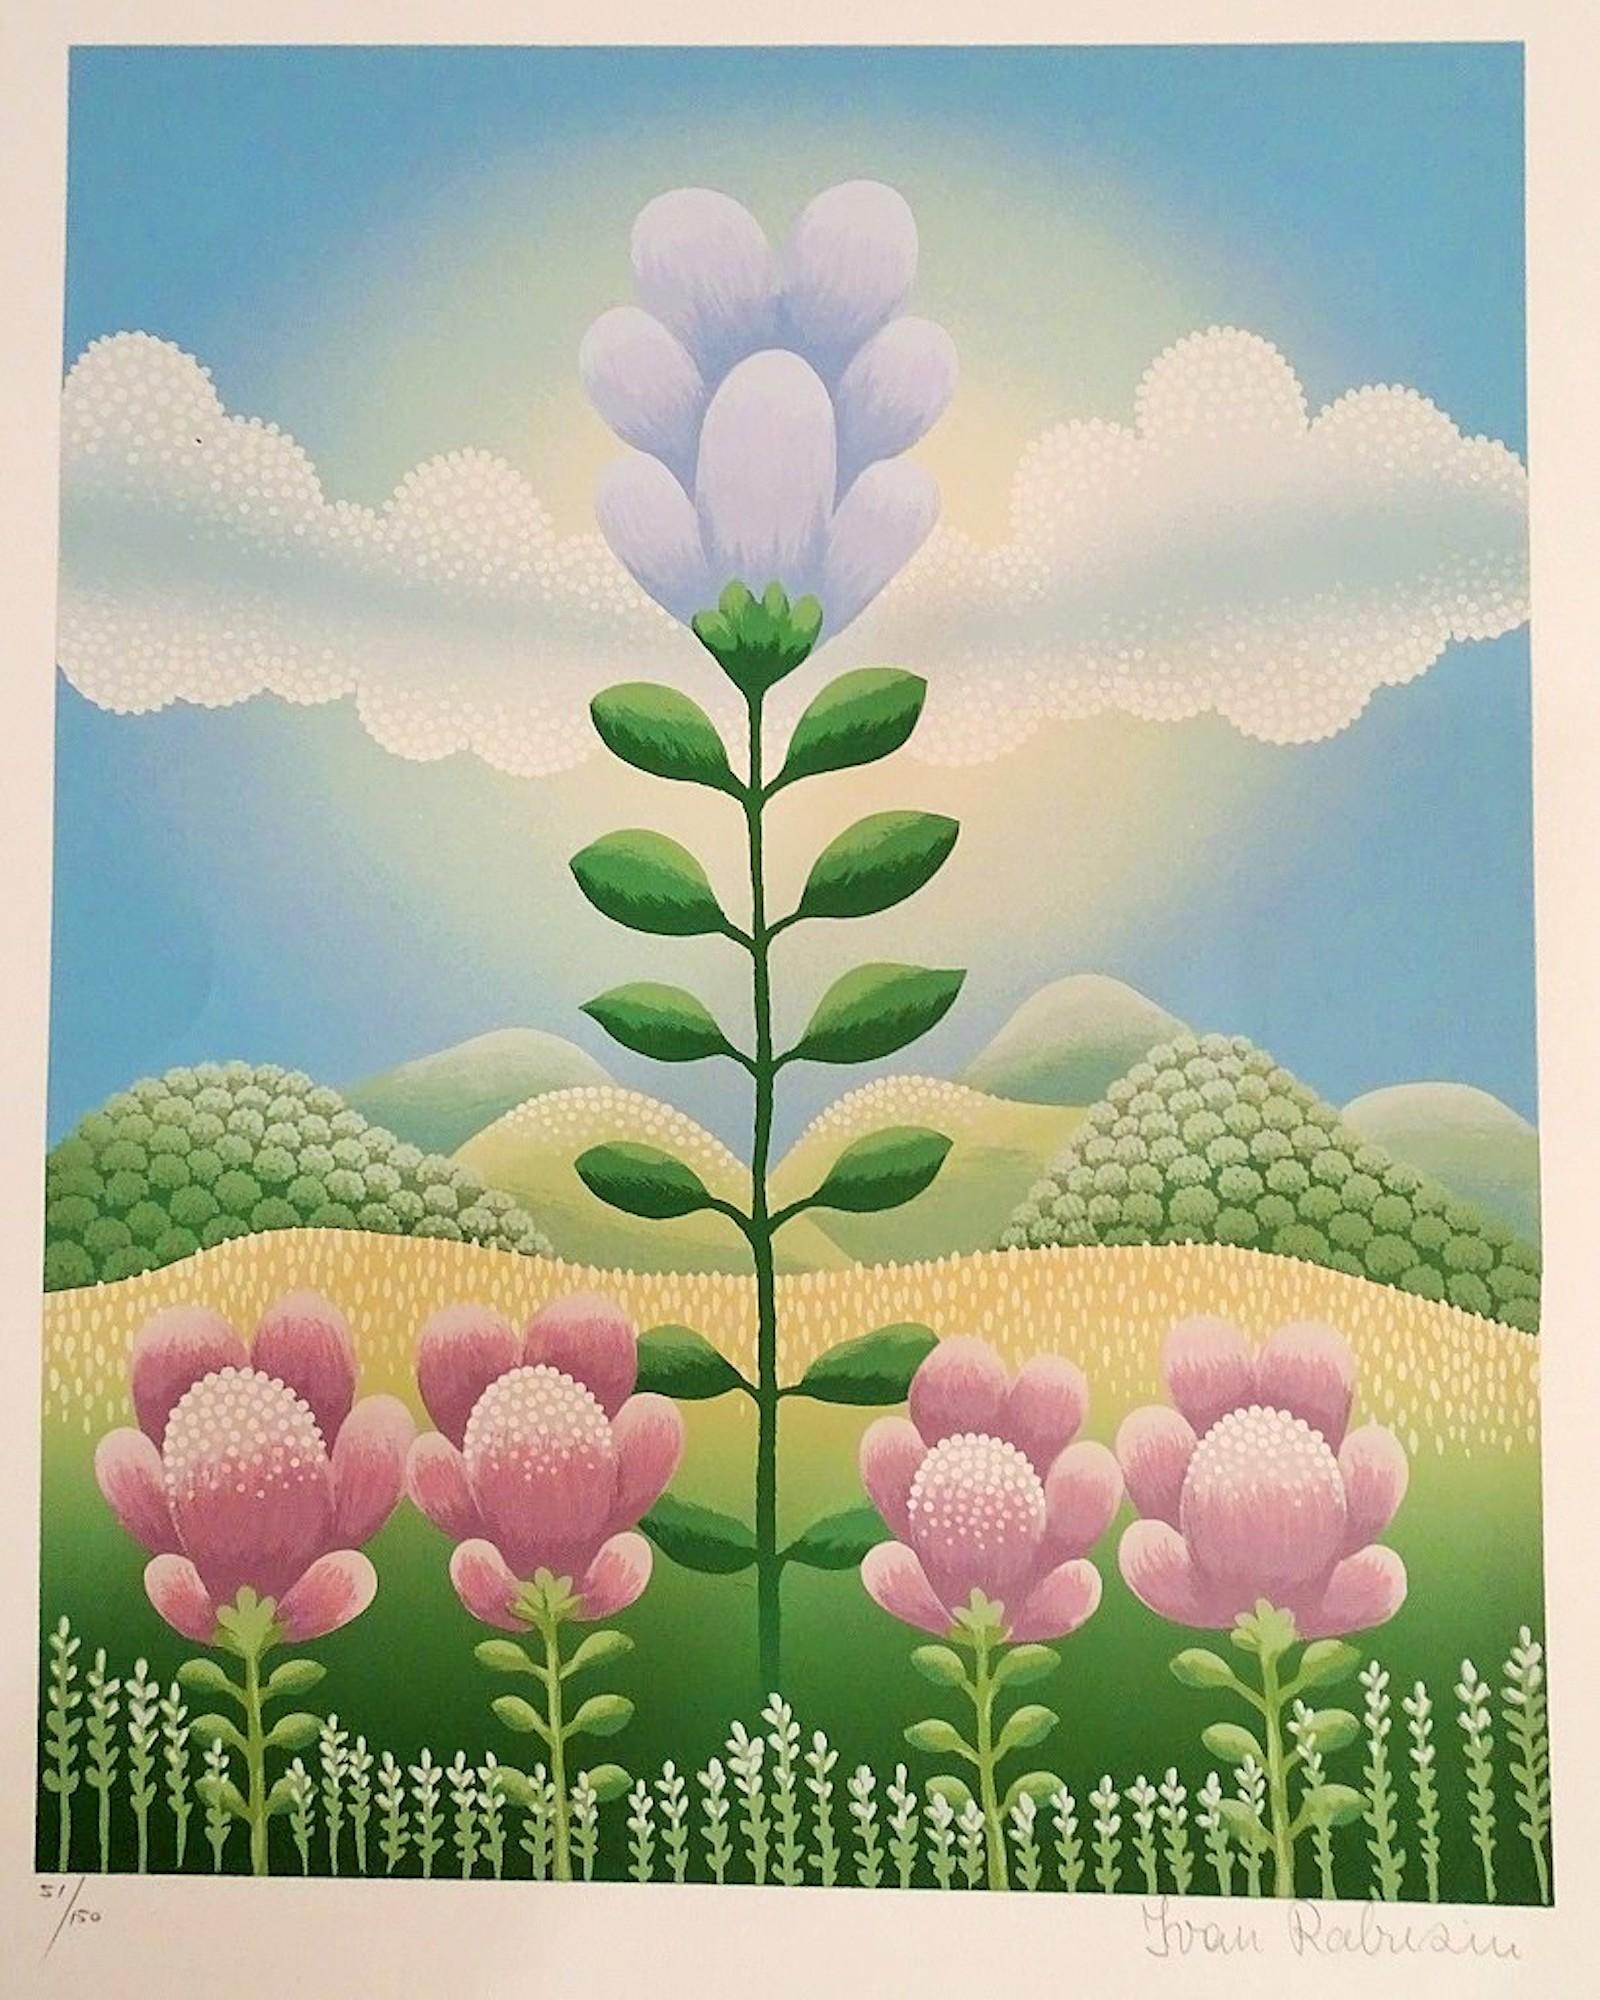 Image dimensions: 41x33 cm.

Big Flower is an original colored serigraph hand-signed (whole signature) and numbered in pencil on the lower margin. Edition of 150 prints.

In very good conditions, except for some minor stains along the margins. This